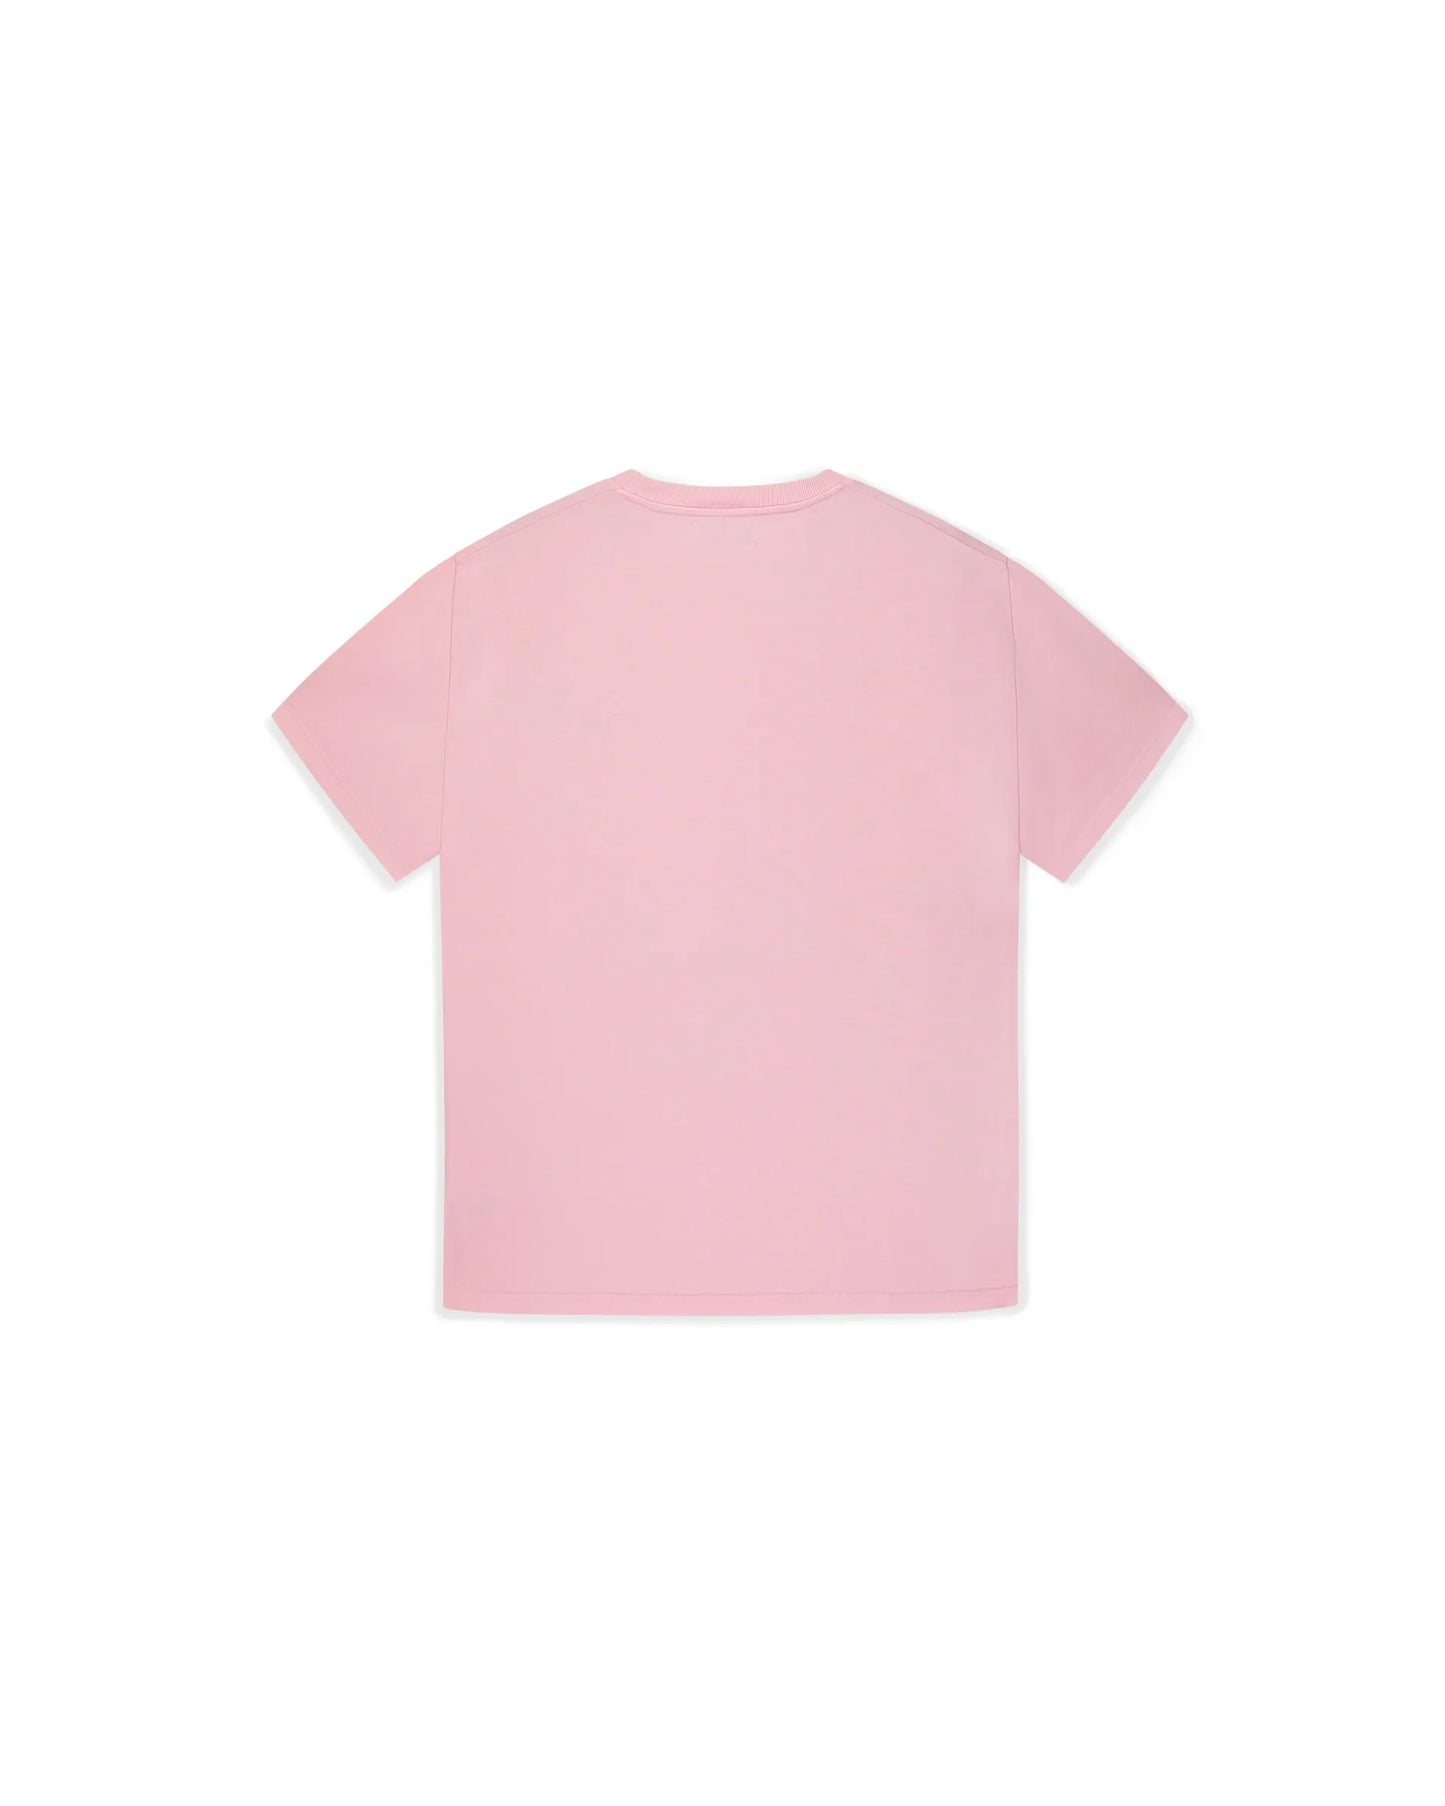 Pink Candy Tee